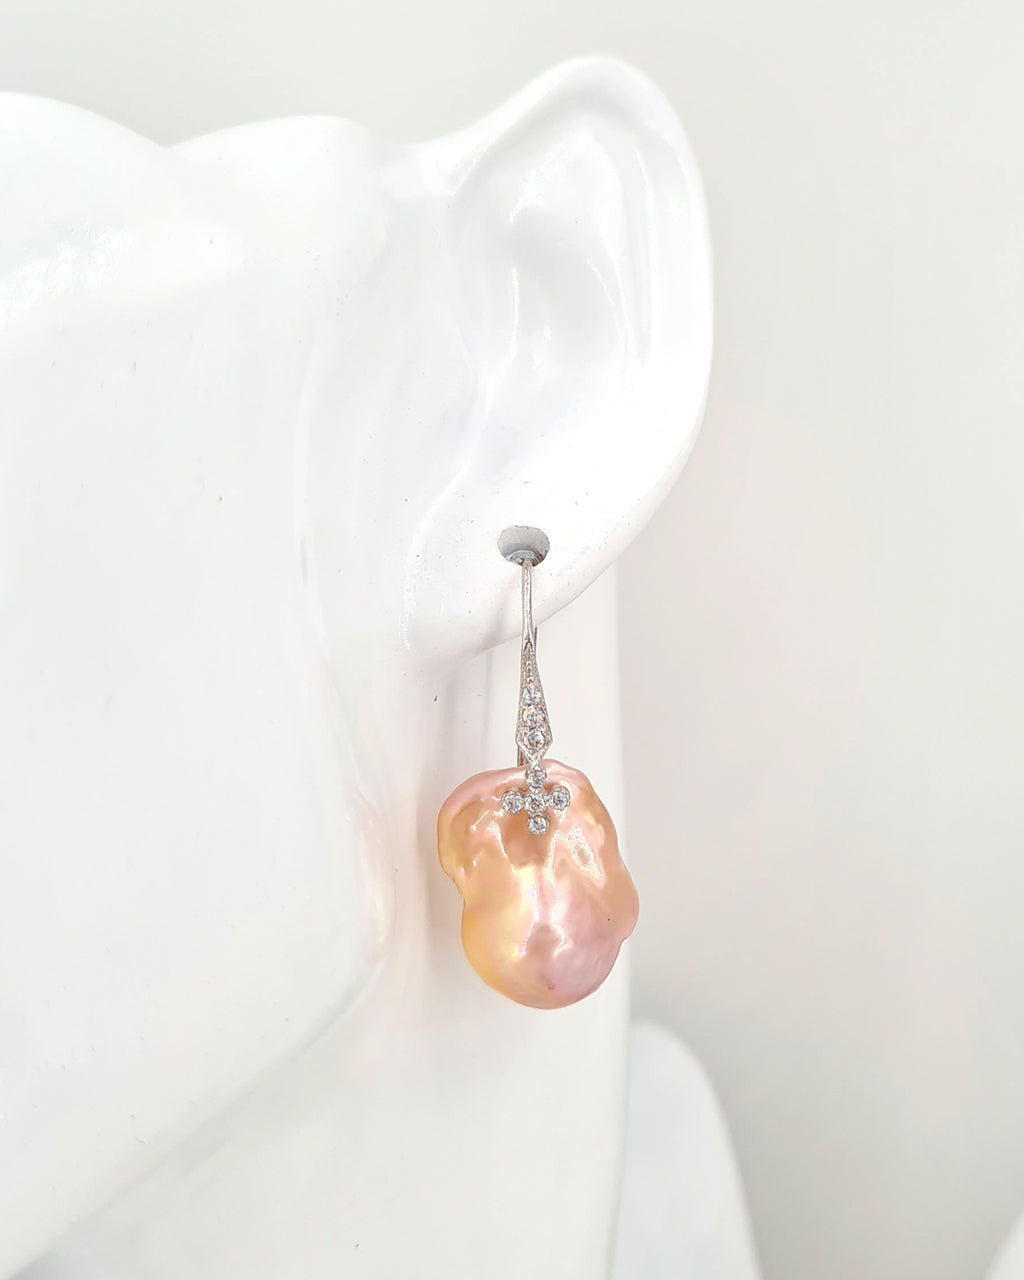 Elegant Baroque Pearl Earrings - Pink Lavender Flameball - Wedding Bridal Jewelry for Brides and Bridesmaids | Singapore